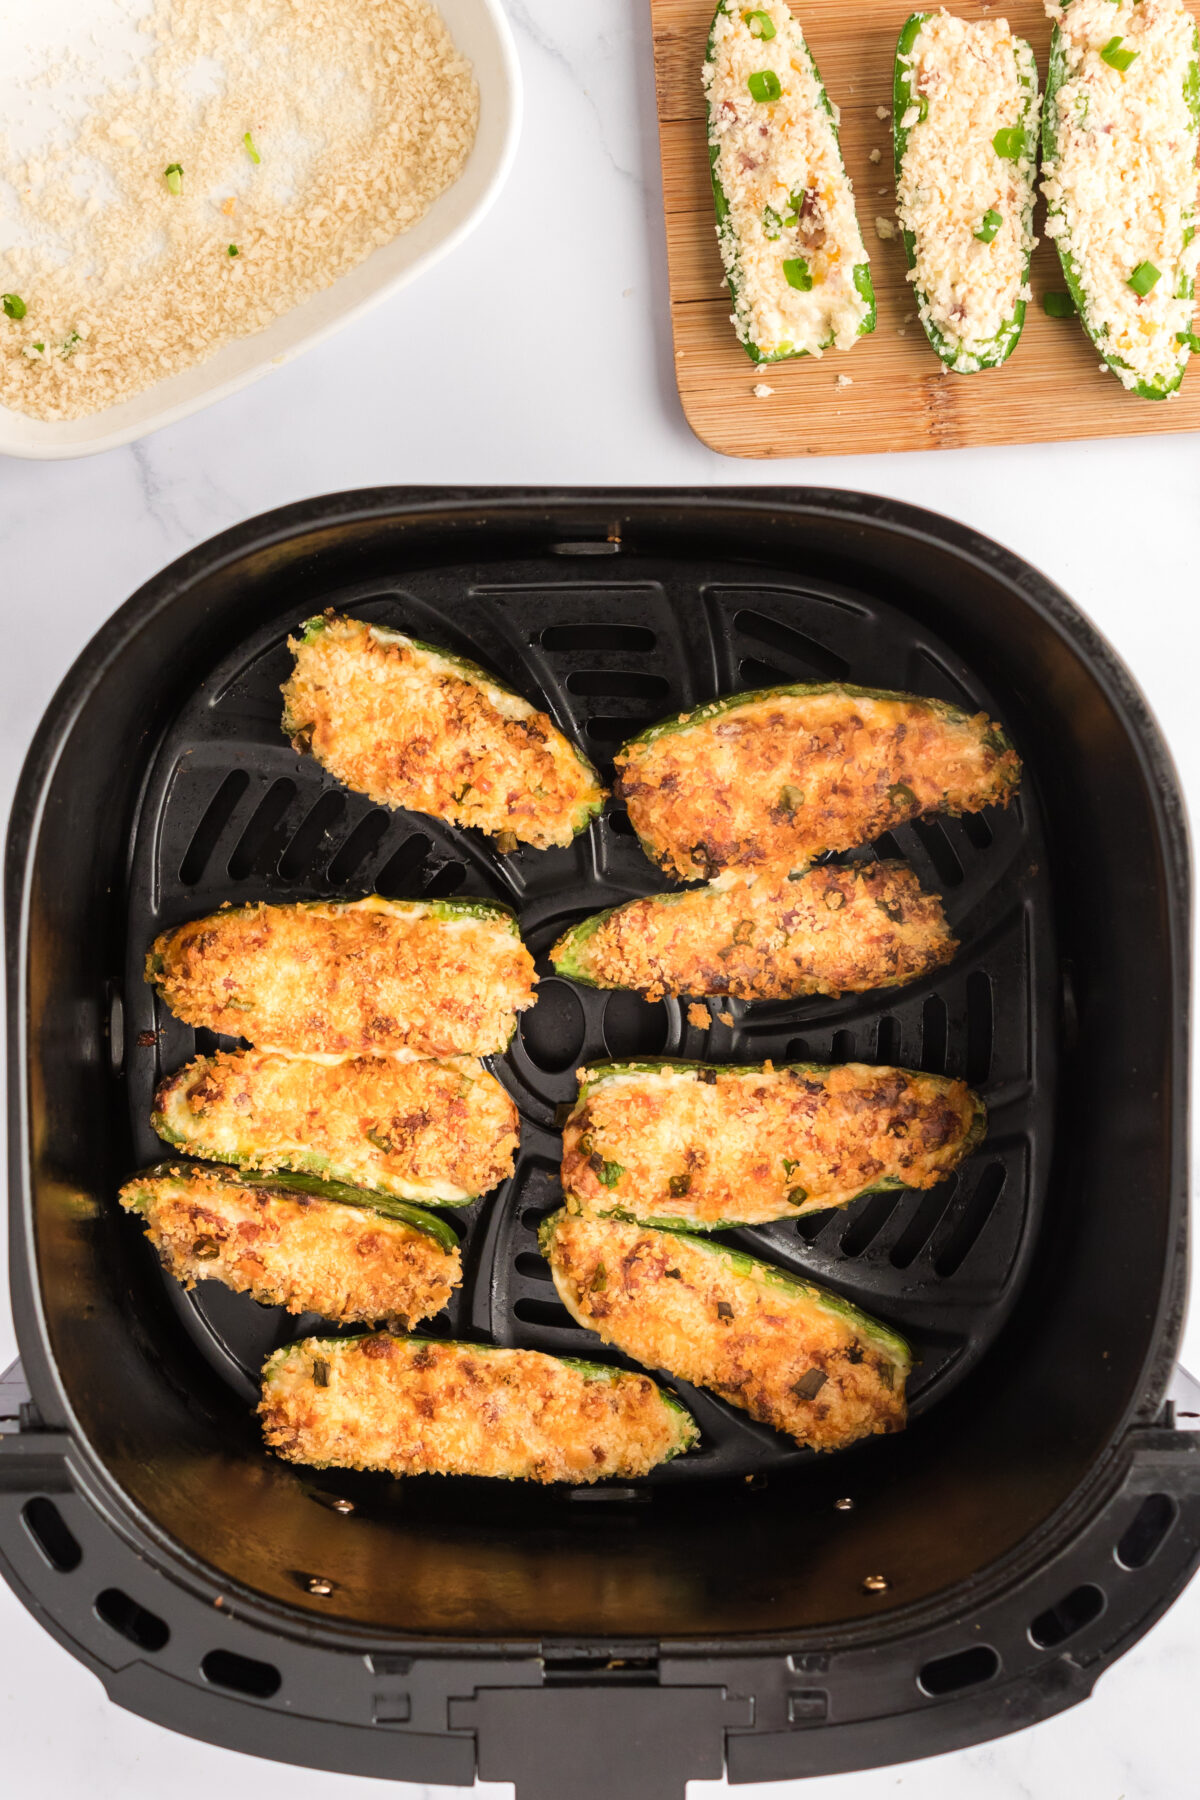 Jalapeno poppers in the bottom of an air fryer.